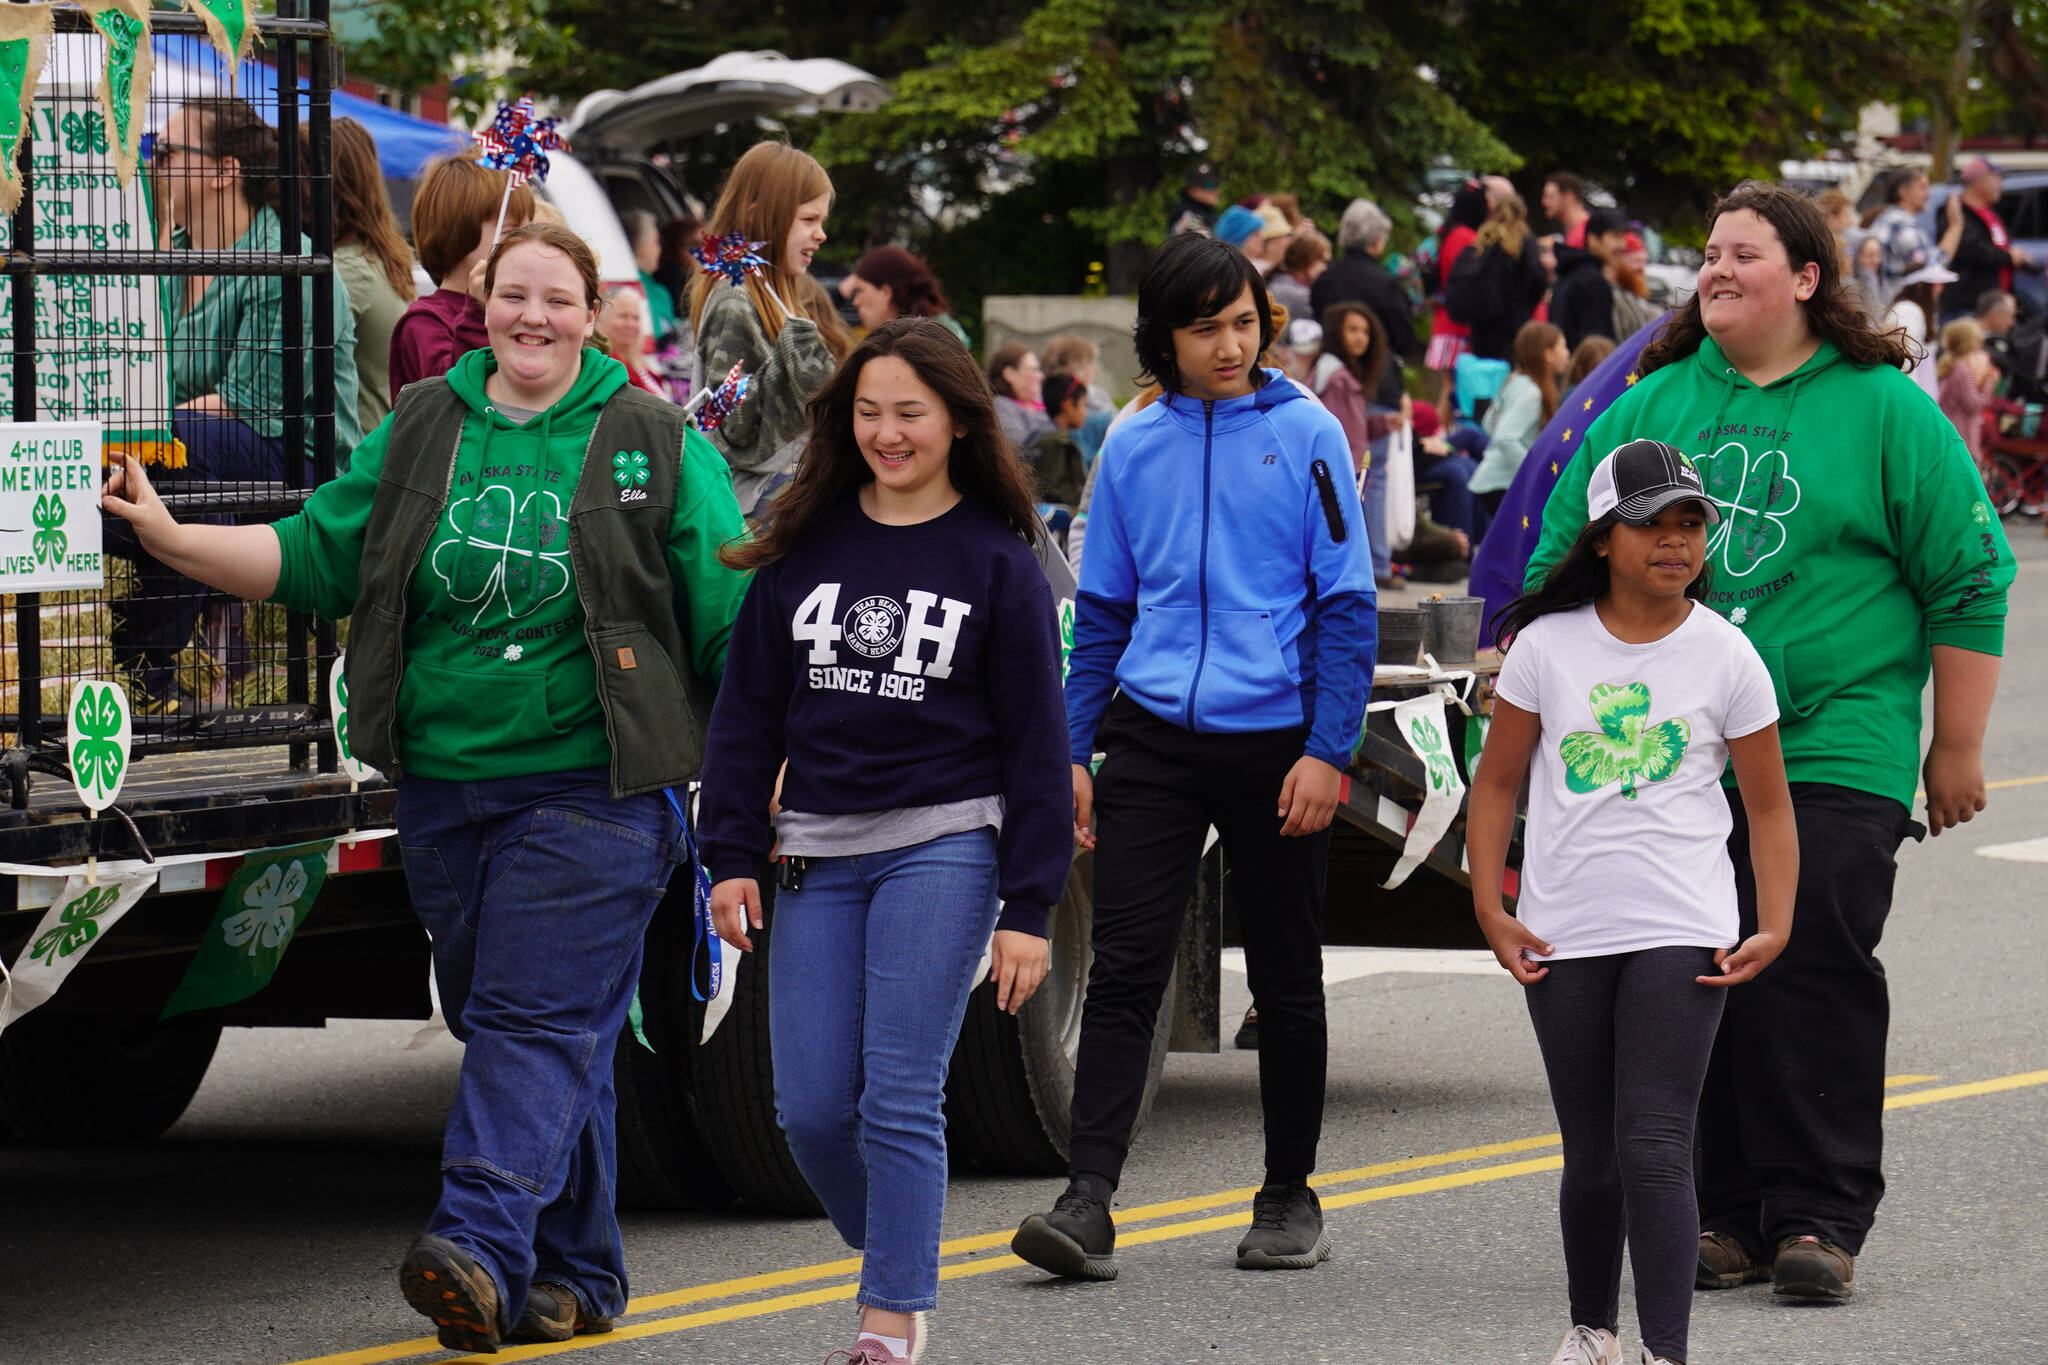 Members of the Kenai Peninsula District 4-H smile and wave as the Fourth of July Parade moves down the Kenai Spur Highway in Kenai, Alaska on Tuesday, July 4, 2023. (Jake Dye/Peninsula Clarion)